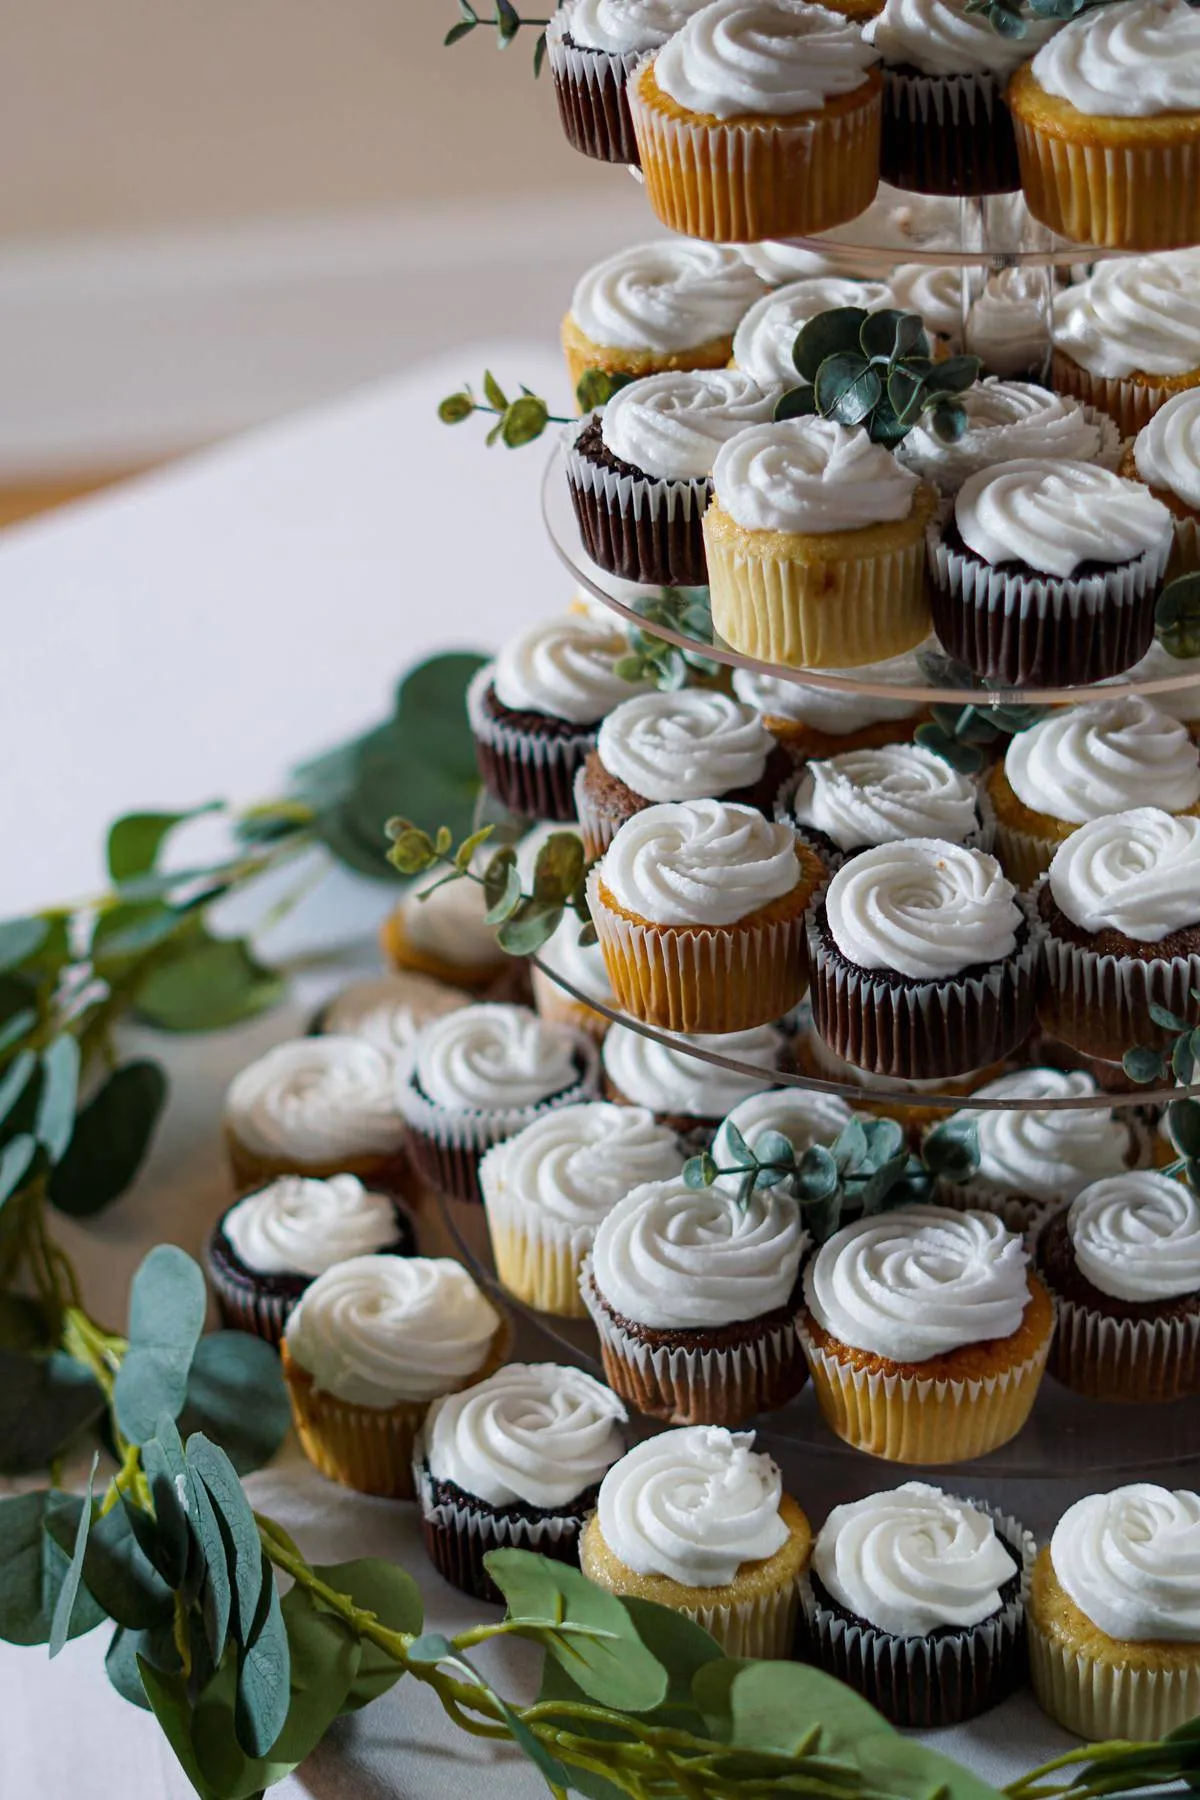 <p>One of the big aspects of wedding planning is food. From hors d'oeuvres to plated meals, wedding cake, late-night drunk food, and edible wedding favors, people eat <i>a lot</i>. In fact, according to <a href="https://www.theknot.com/content/average-cost-wedding-catering" rel="noopener noreferrer">The Knot</a>, catering costs $70 per guest, so it’s easy to see how a wedding bill can quickly add up. If you’re partaking in food that is meant to be shared among guests (like cupcakes or drunk food) make sure you take your fair share and leave enough for others. </p> <p>My friend/bridesmaid had a candy bar as her wedding favor and it was all gone before I got there. Five years later and I’m <i>still</i> bitter about it.</p>